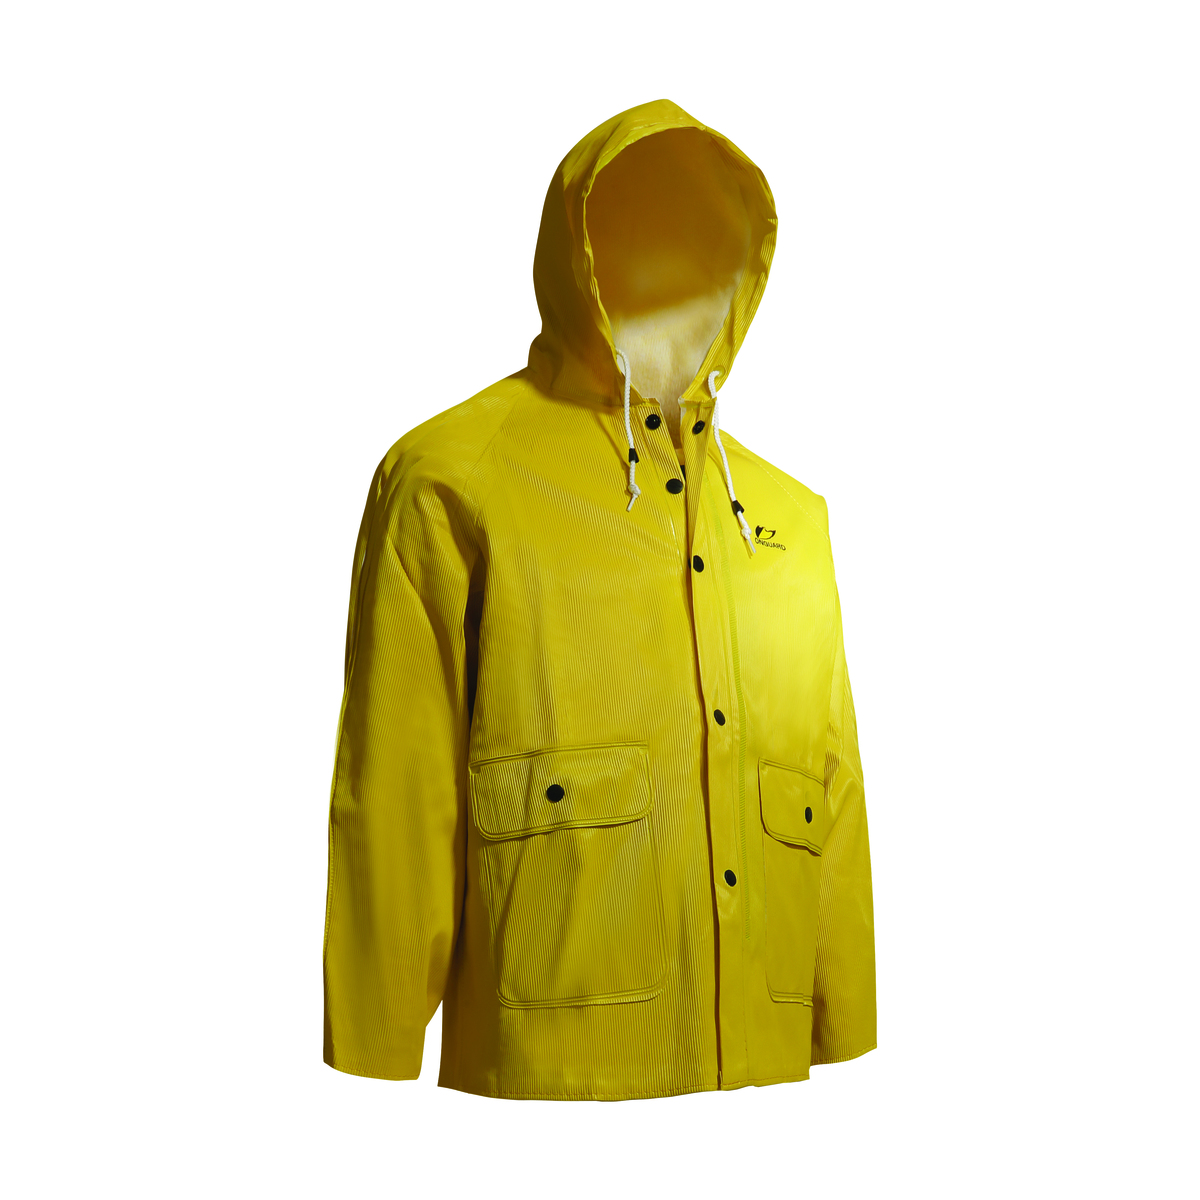 Dunlop® Protective Footwear Medium Yellow Webtex .65 mm Polyester/PVC Rain Jacket With Attached Hood